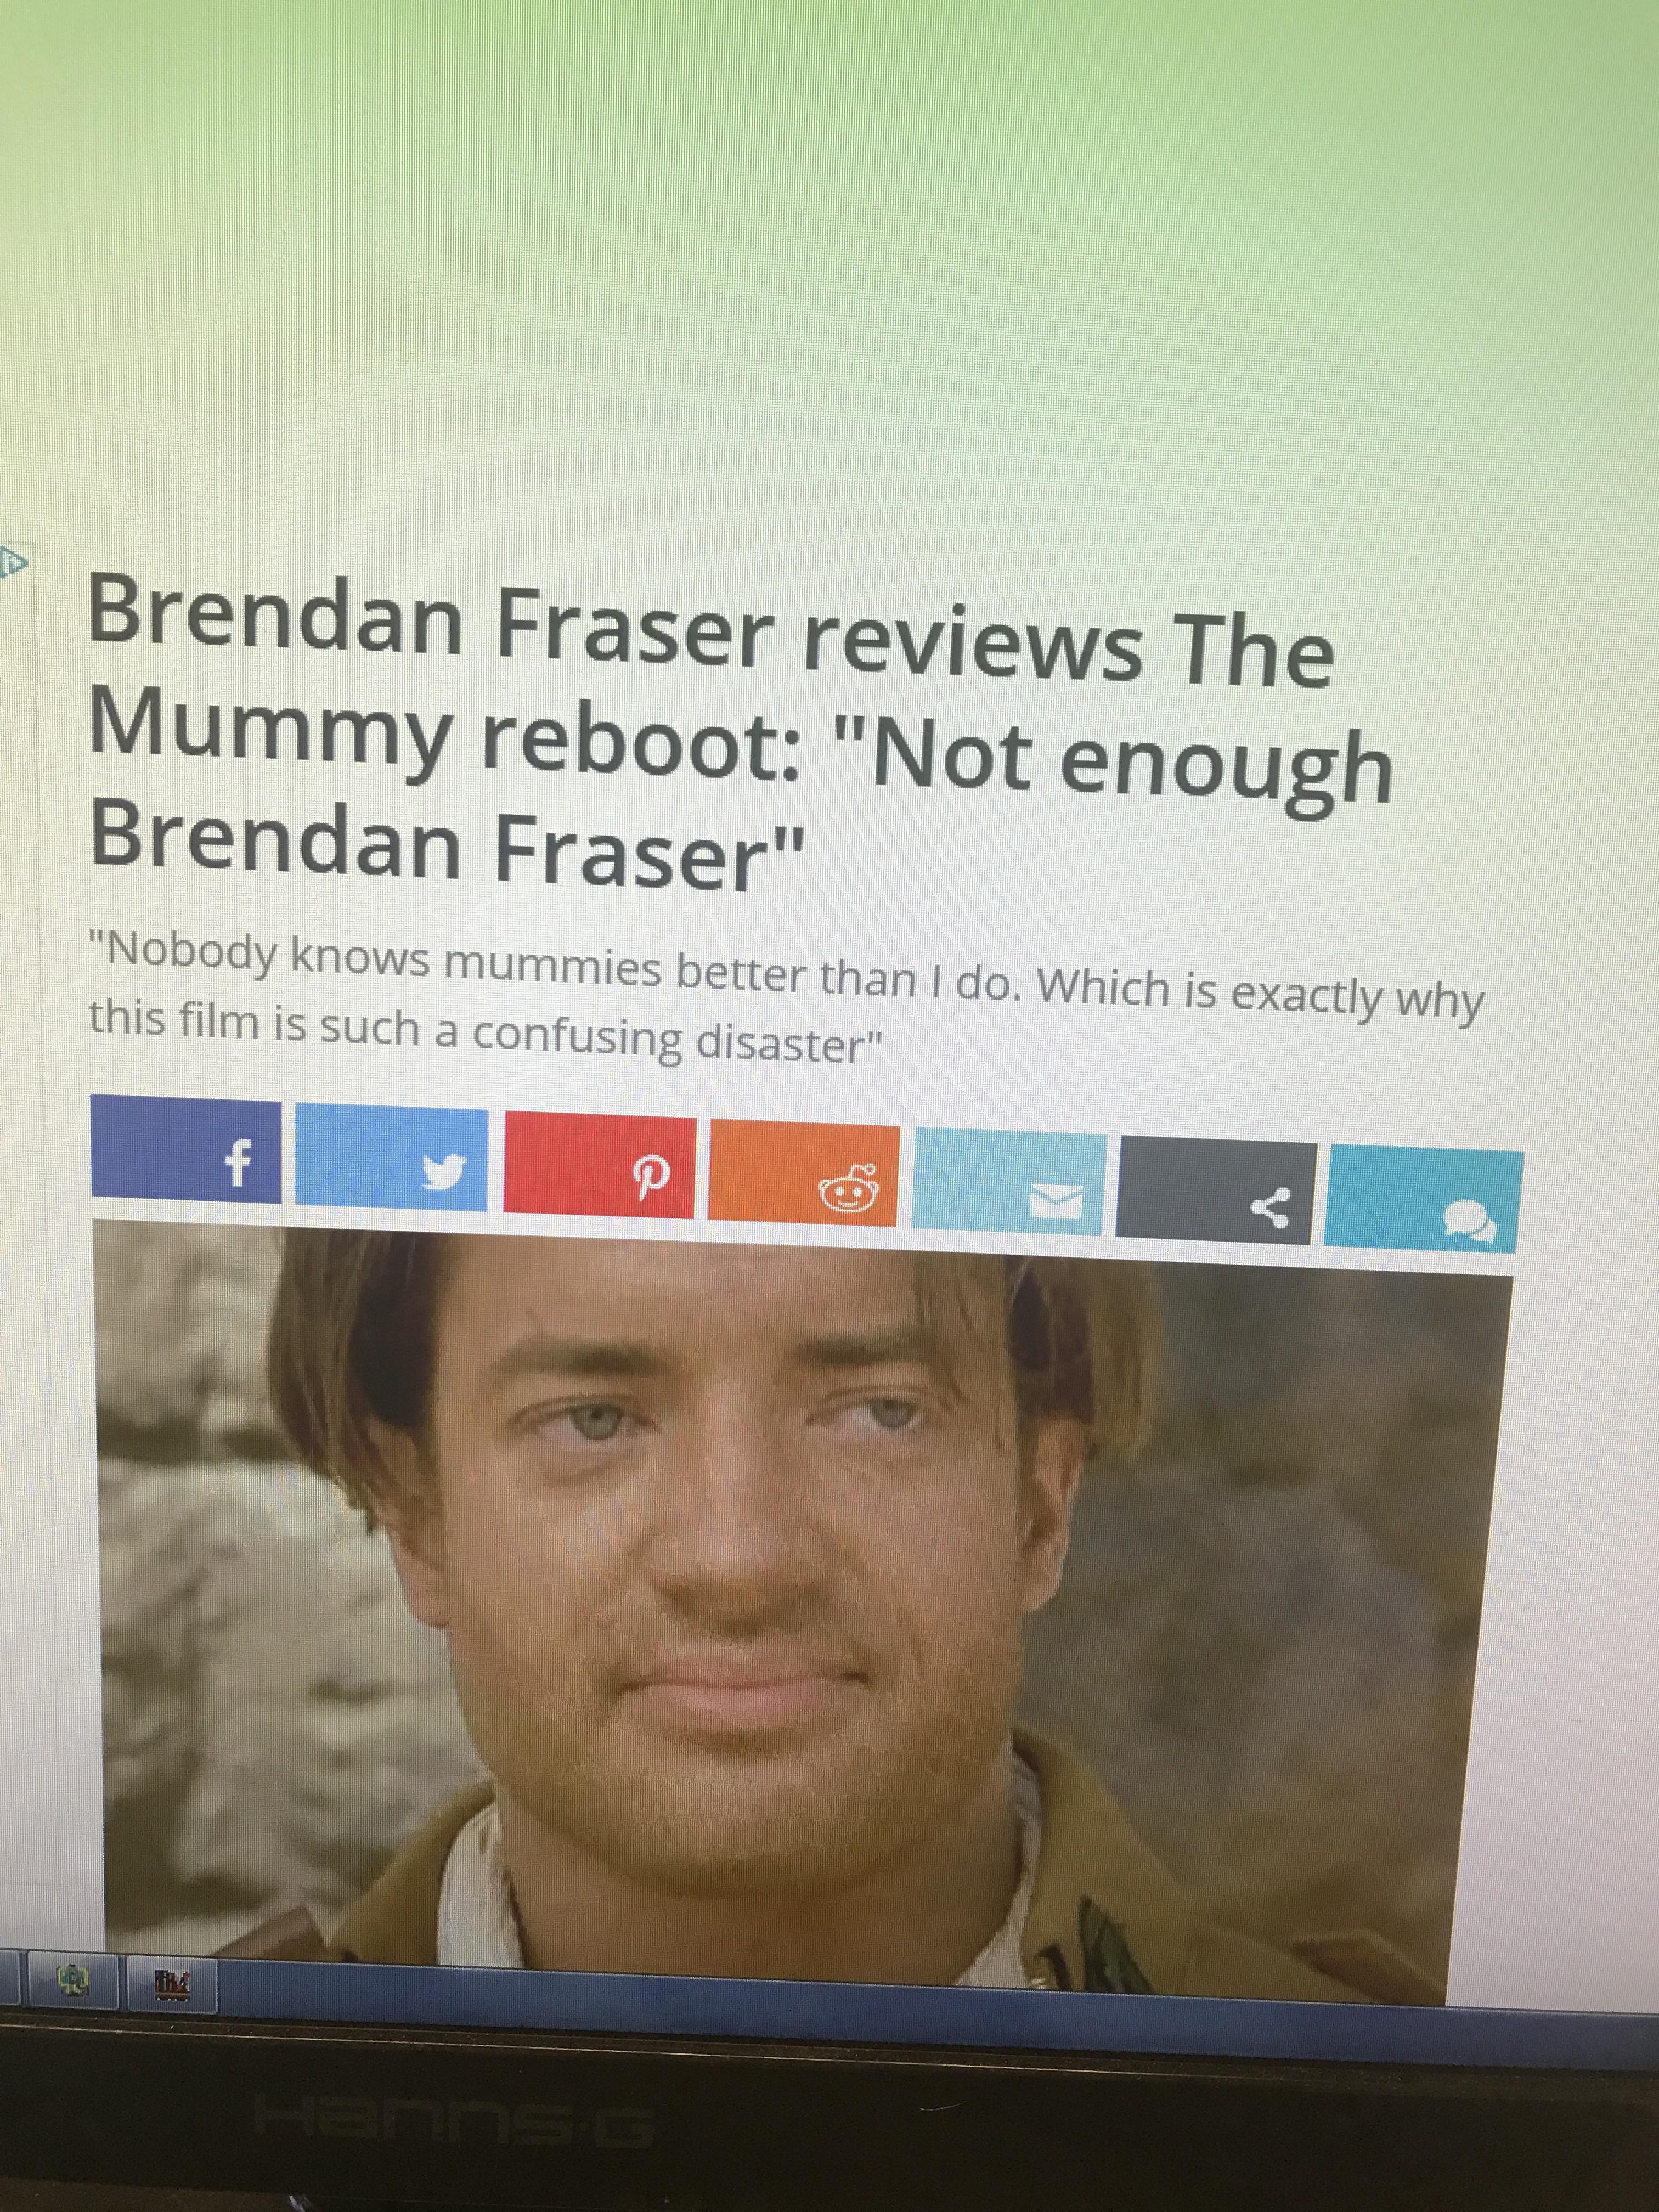 Brendan Fraser reviews The Mummy reboot "Not enough Brendan Fraser" "Nobody knows mummies better than I do. Which is exactly why this film is such a confusing disaster"